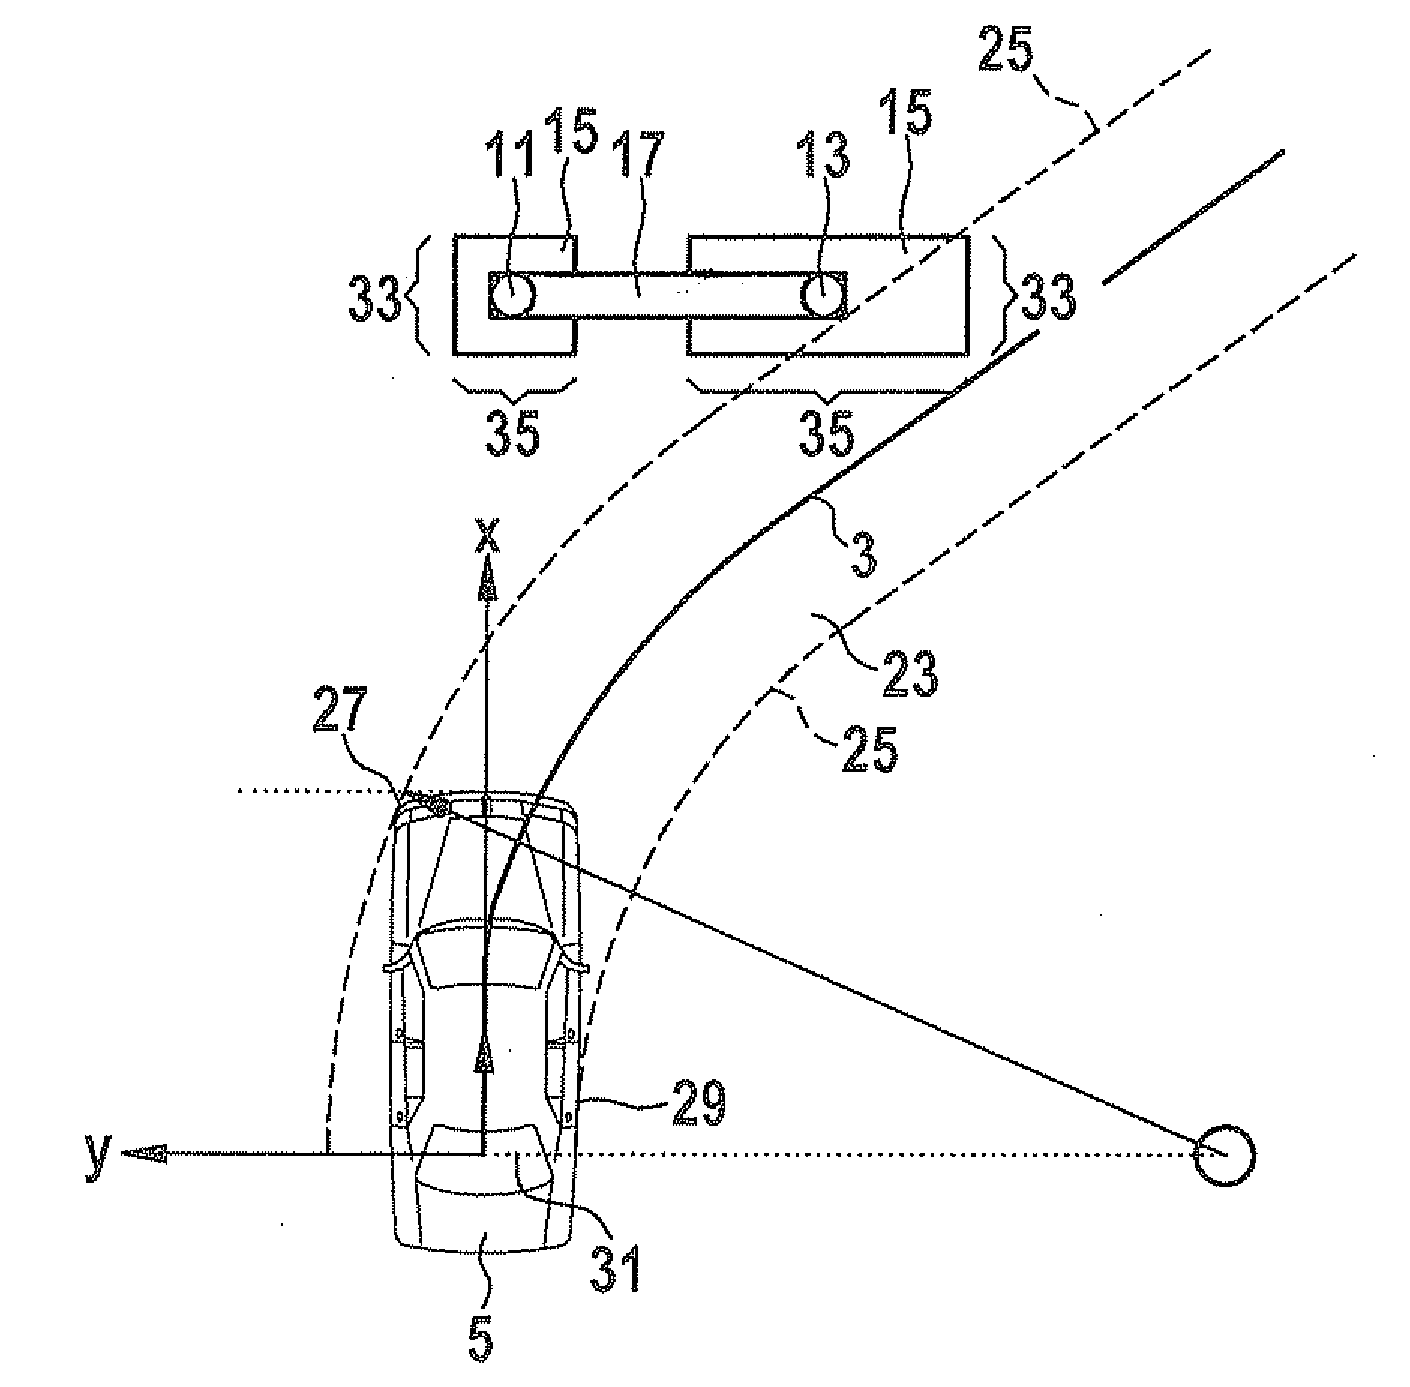 Method for mapping the surroundings of a vehicle